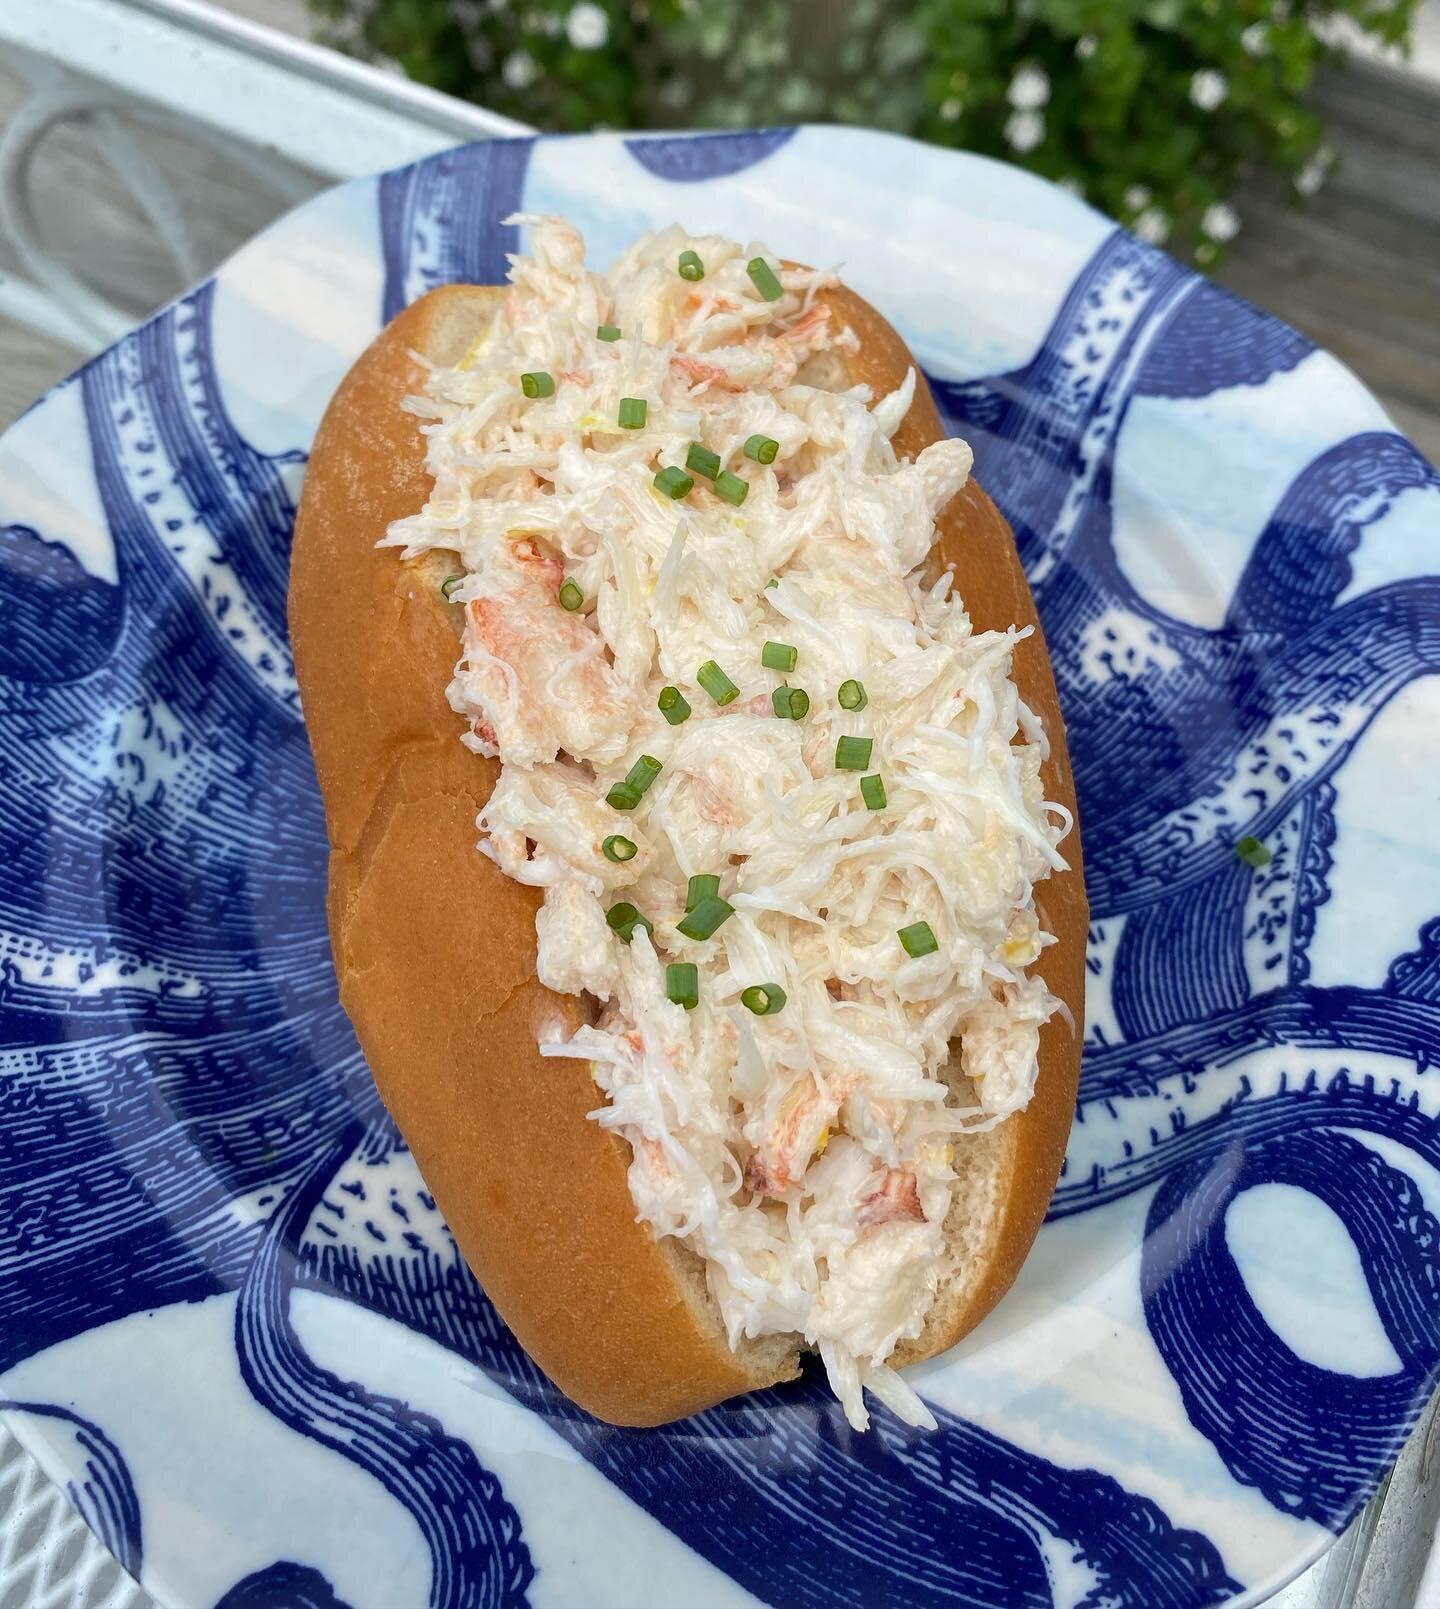 When its really hot (or honestly in any weather), one of my favorite quick non-cook dinners is making crab rolls! I buy already picked jonah crab meat or I save crab meat from when I buy and pick a bunch of crabs and then combine it with a little may